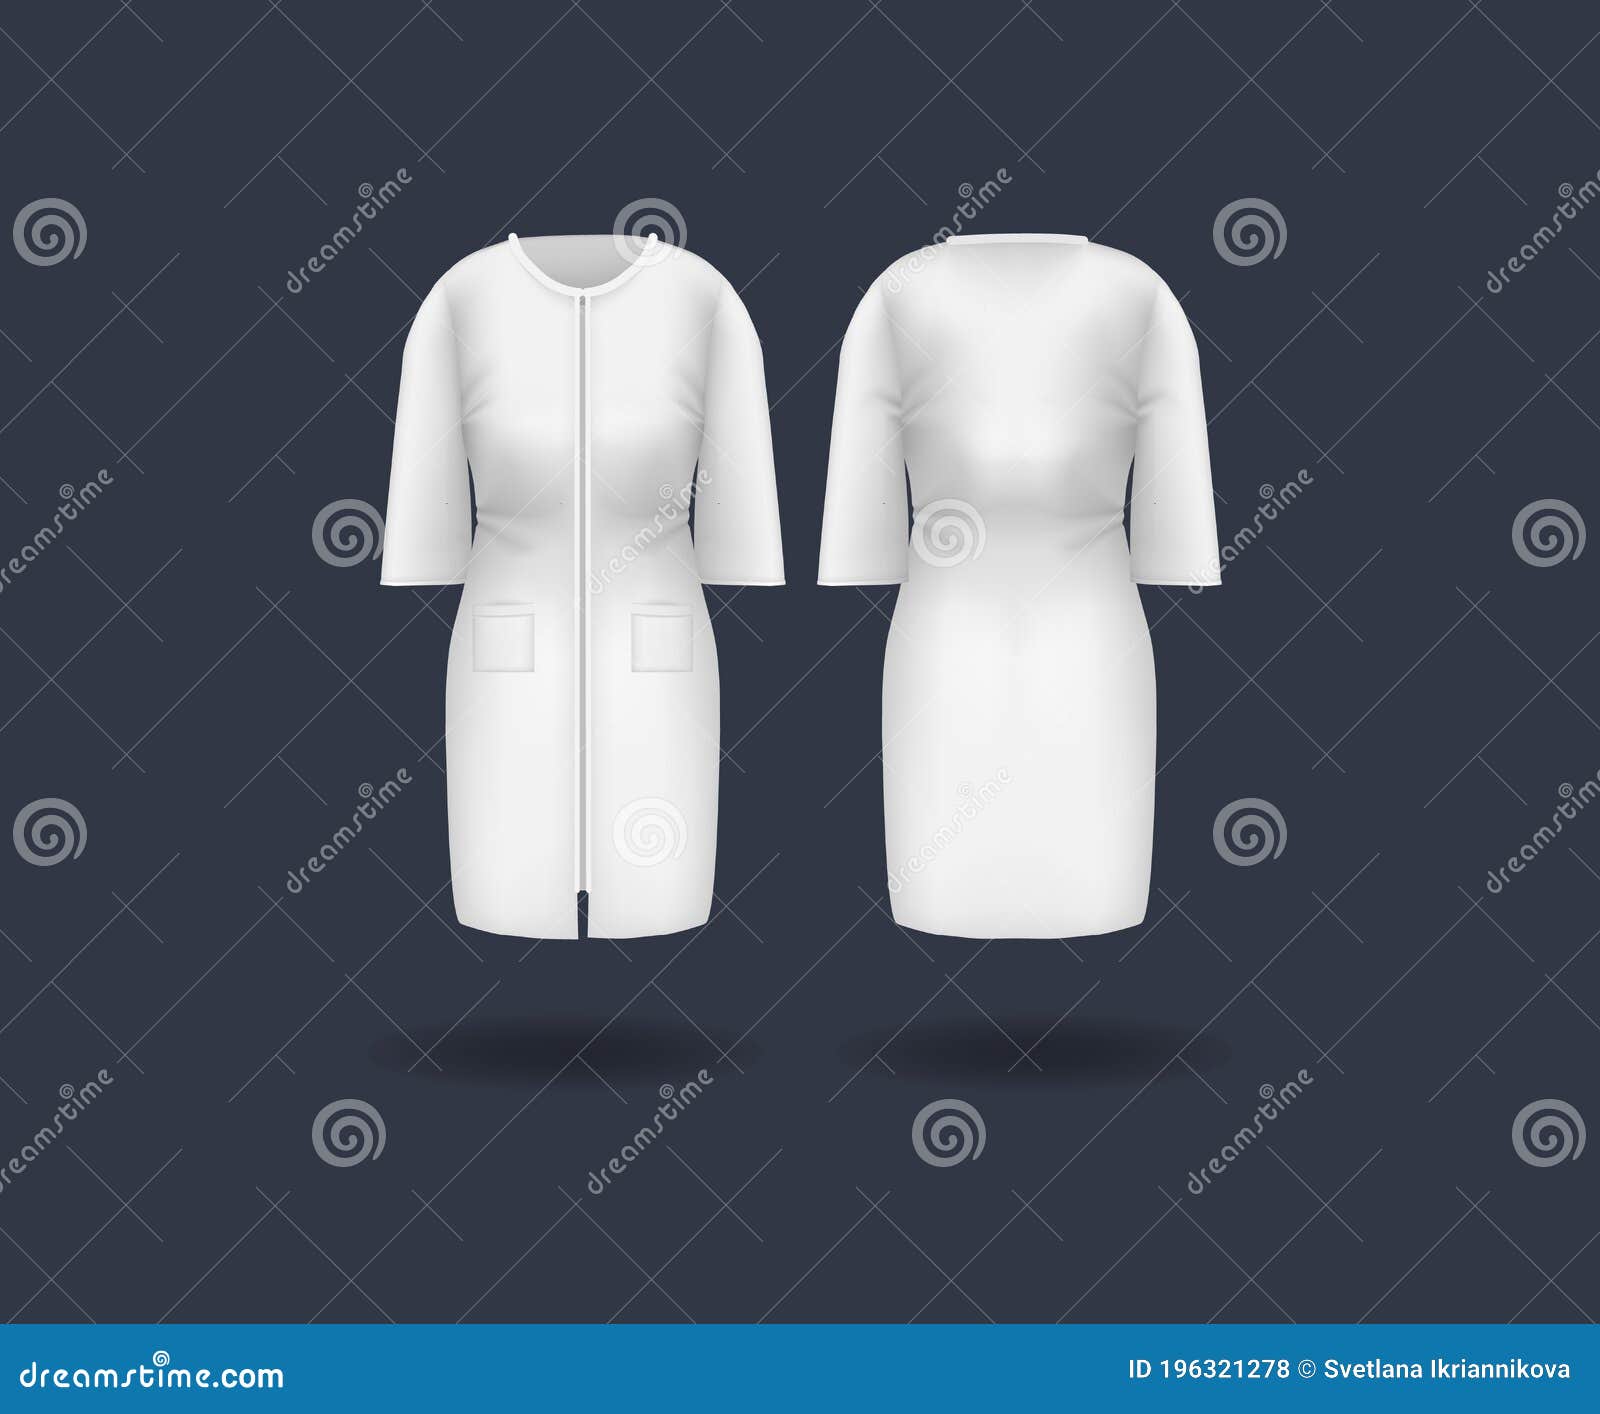 Download Realistic Doctor Coat Mock Up. Women`s Medical Gown, Lab Uniform, Doctor Medical Laboratory ...